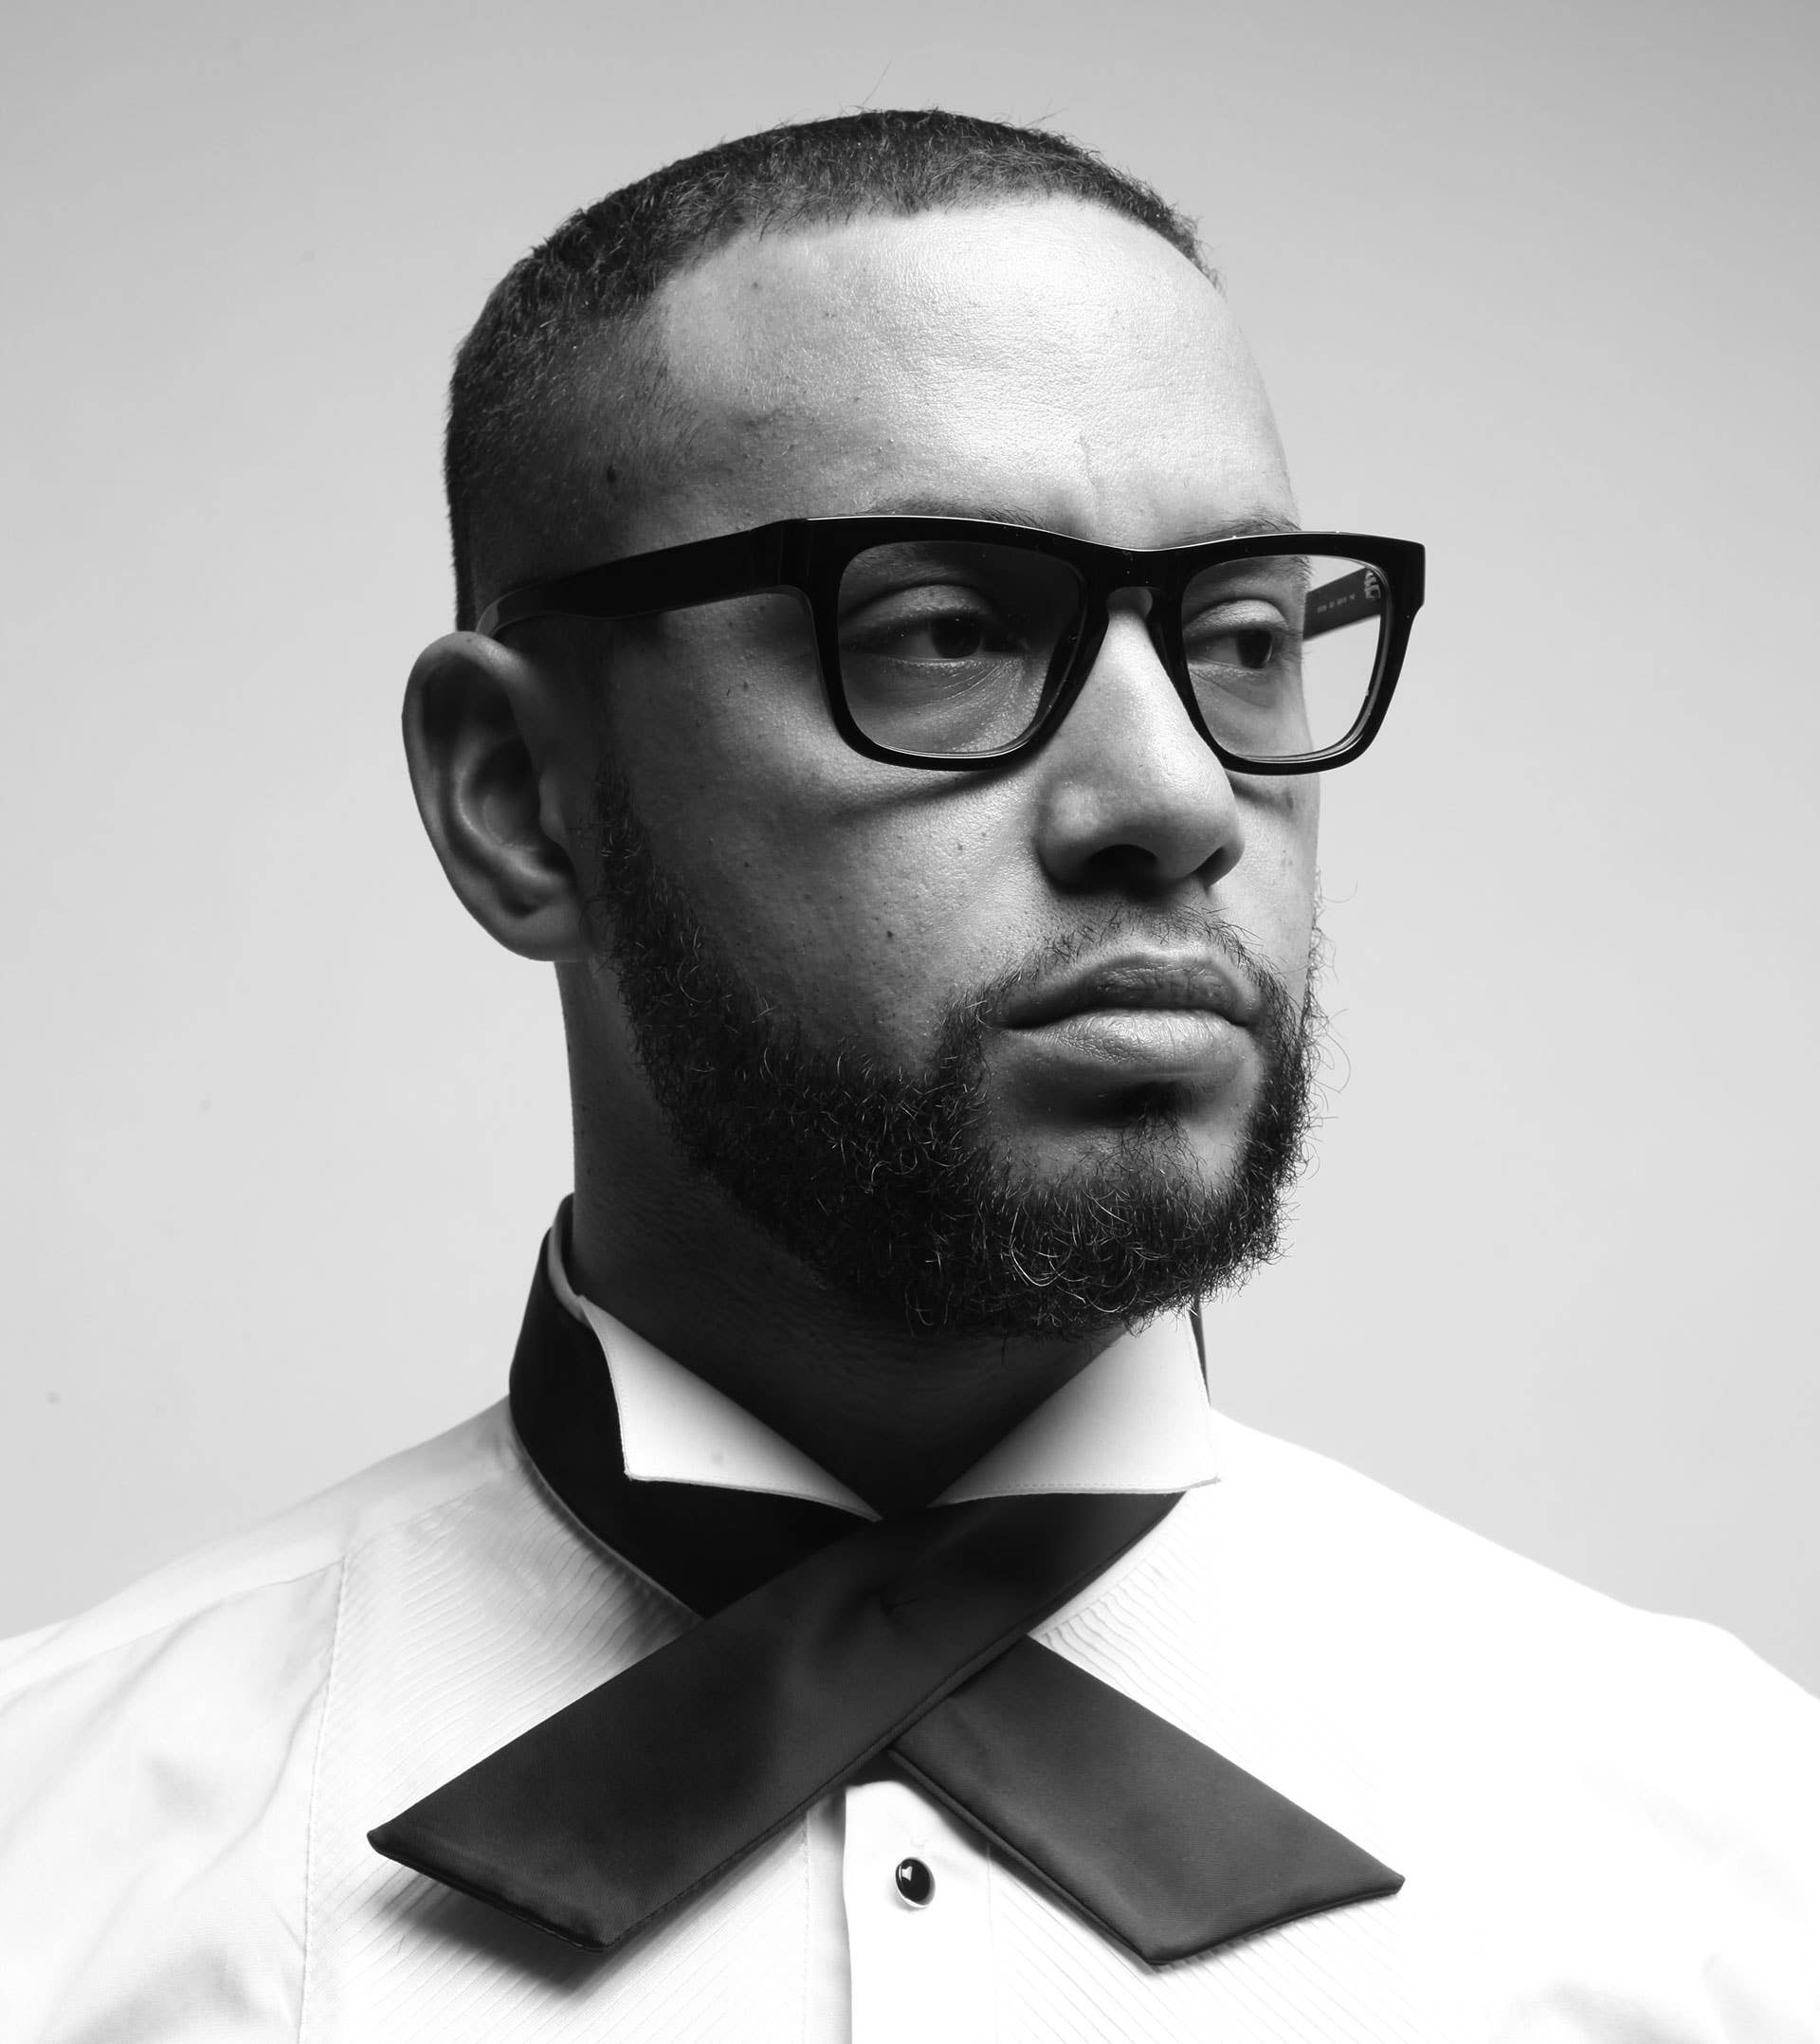 Director X poses in a white shirt and x-shaped tie